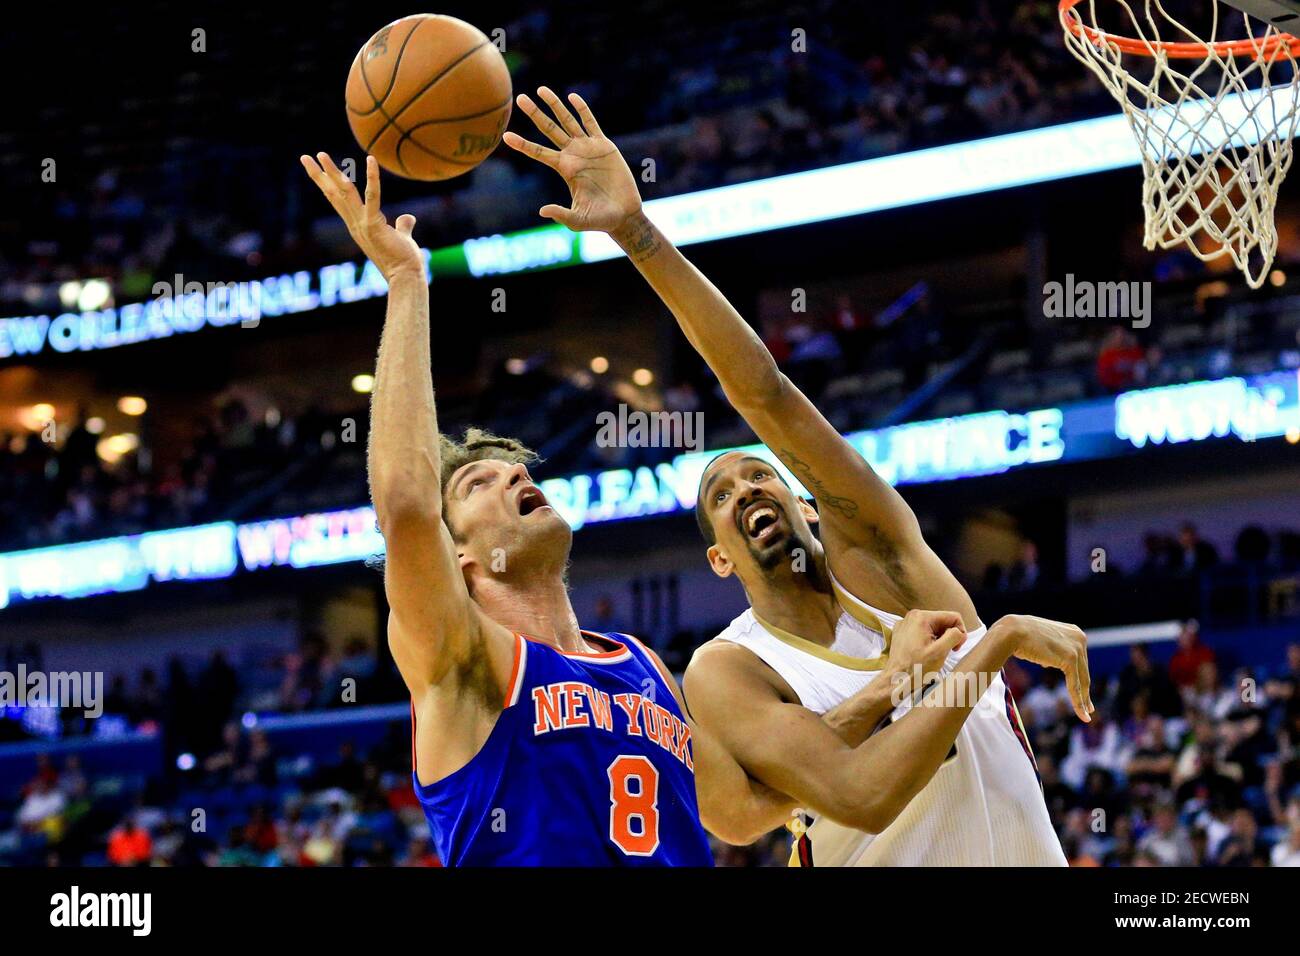 Mar 28, 2016; New Orleans, LA, USA; New York Knicks center Robin Lopez (8) and New Orleans Pelicans center Alexis Ajinca (42) battle for a rebound during the second quarter of a game at the Smoothie King Center. Mandatory Credit: Derick E. Hingle-USA TODAY Sports  / Reuters  Picture Supplied by Action Images   (TAGS: Sport Basketball NBA) *** Local Caption *** 2016-03-29T013451Z 618645558 NOCID RTRMADP 3 NBA-NEW-YORK-KNICKS-AT-NEW-ORLEANS-PELICANS.JPG Stock Photo